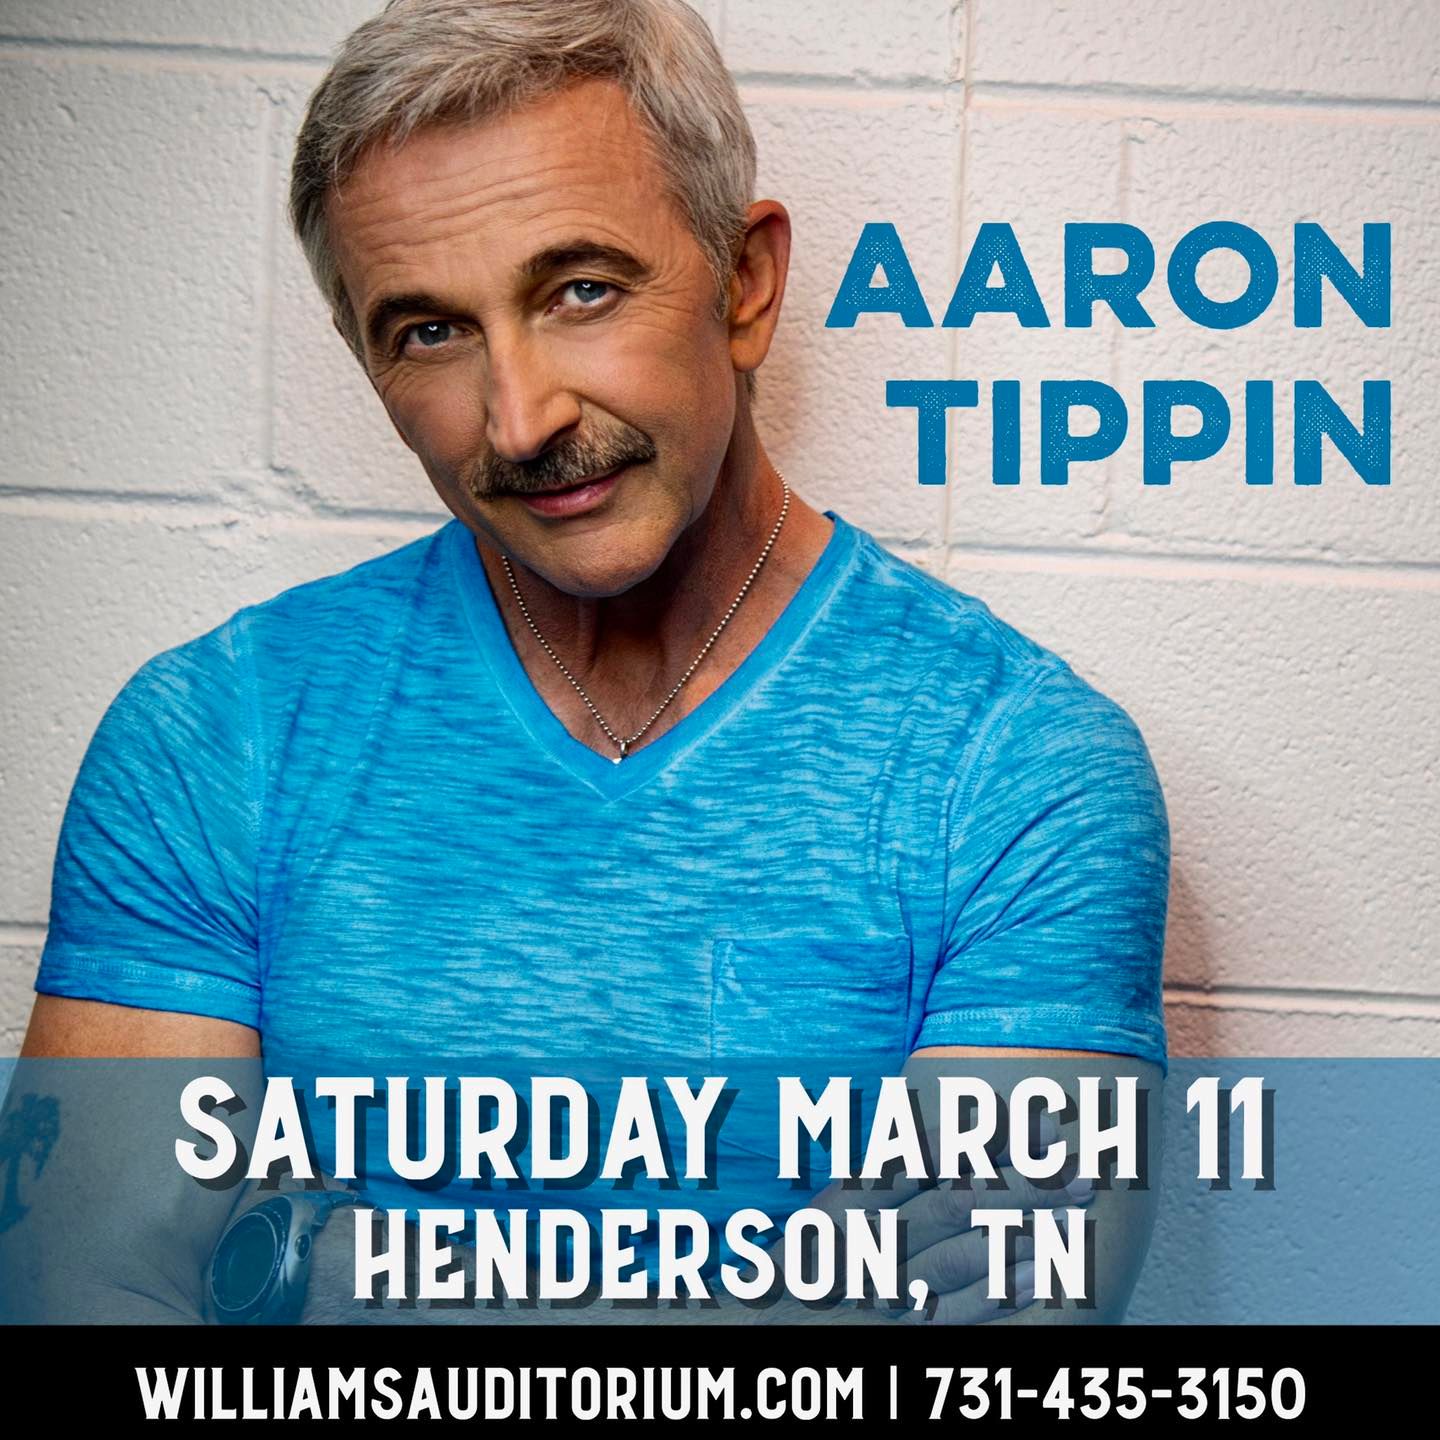 Buy Tickets to Aaron Tippin in Henderson on Mar 11, 2023